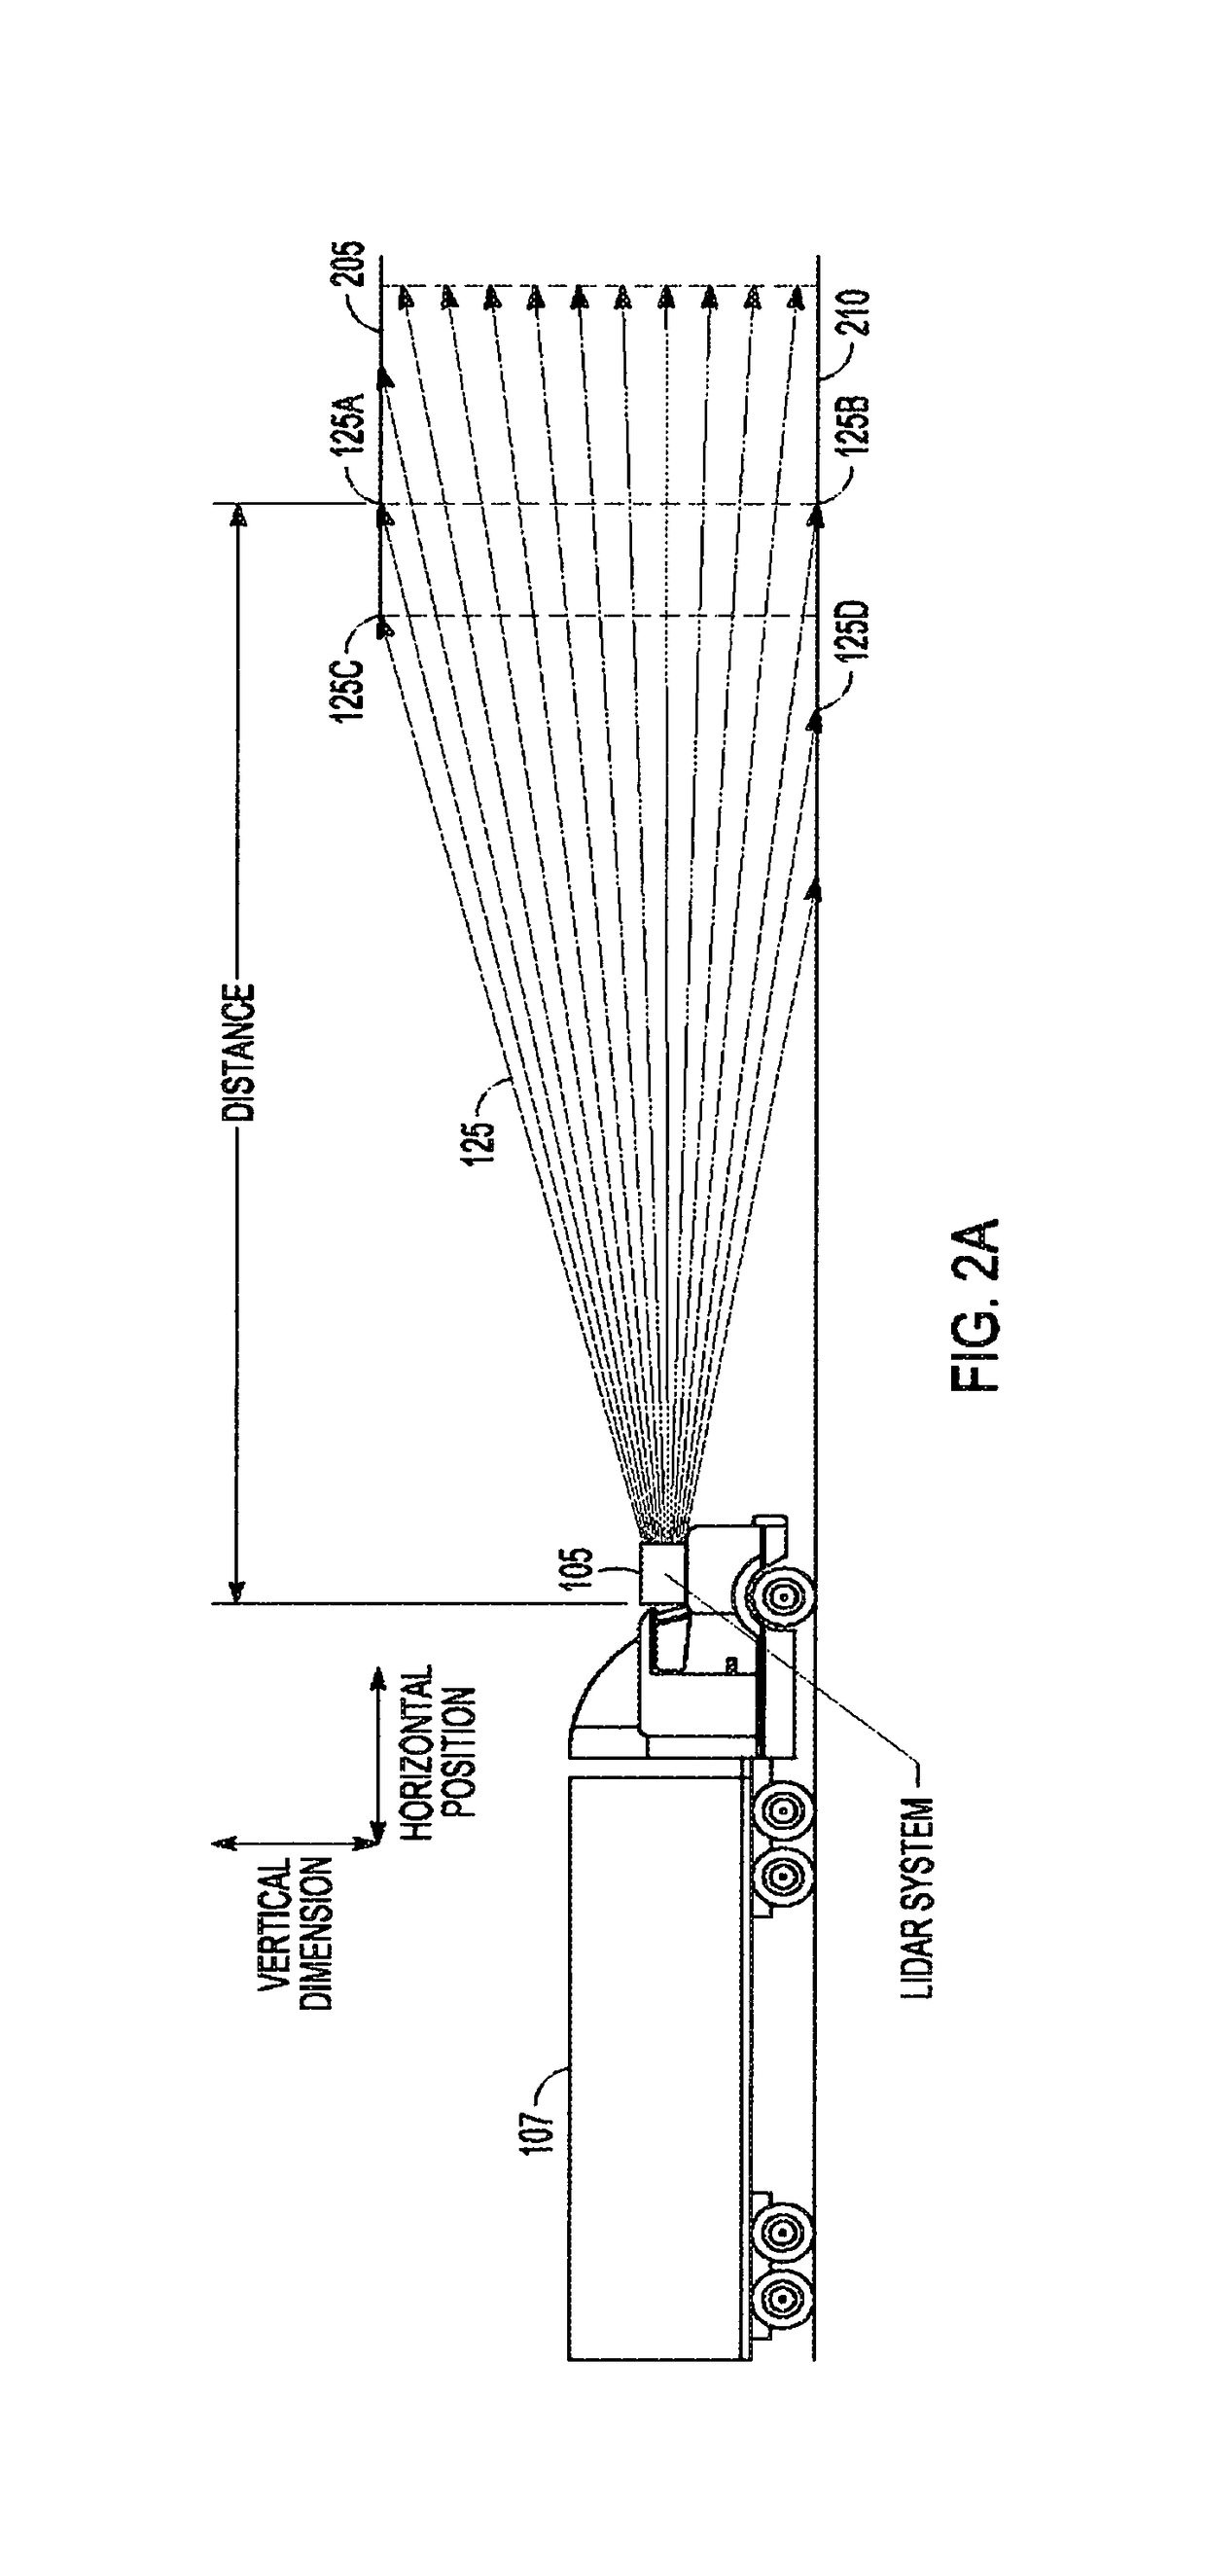 Systems and methods for measuring a bridge clearance